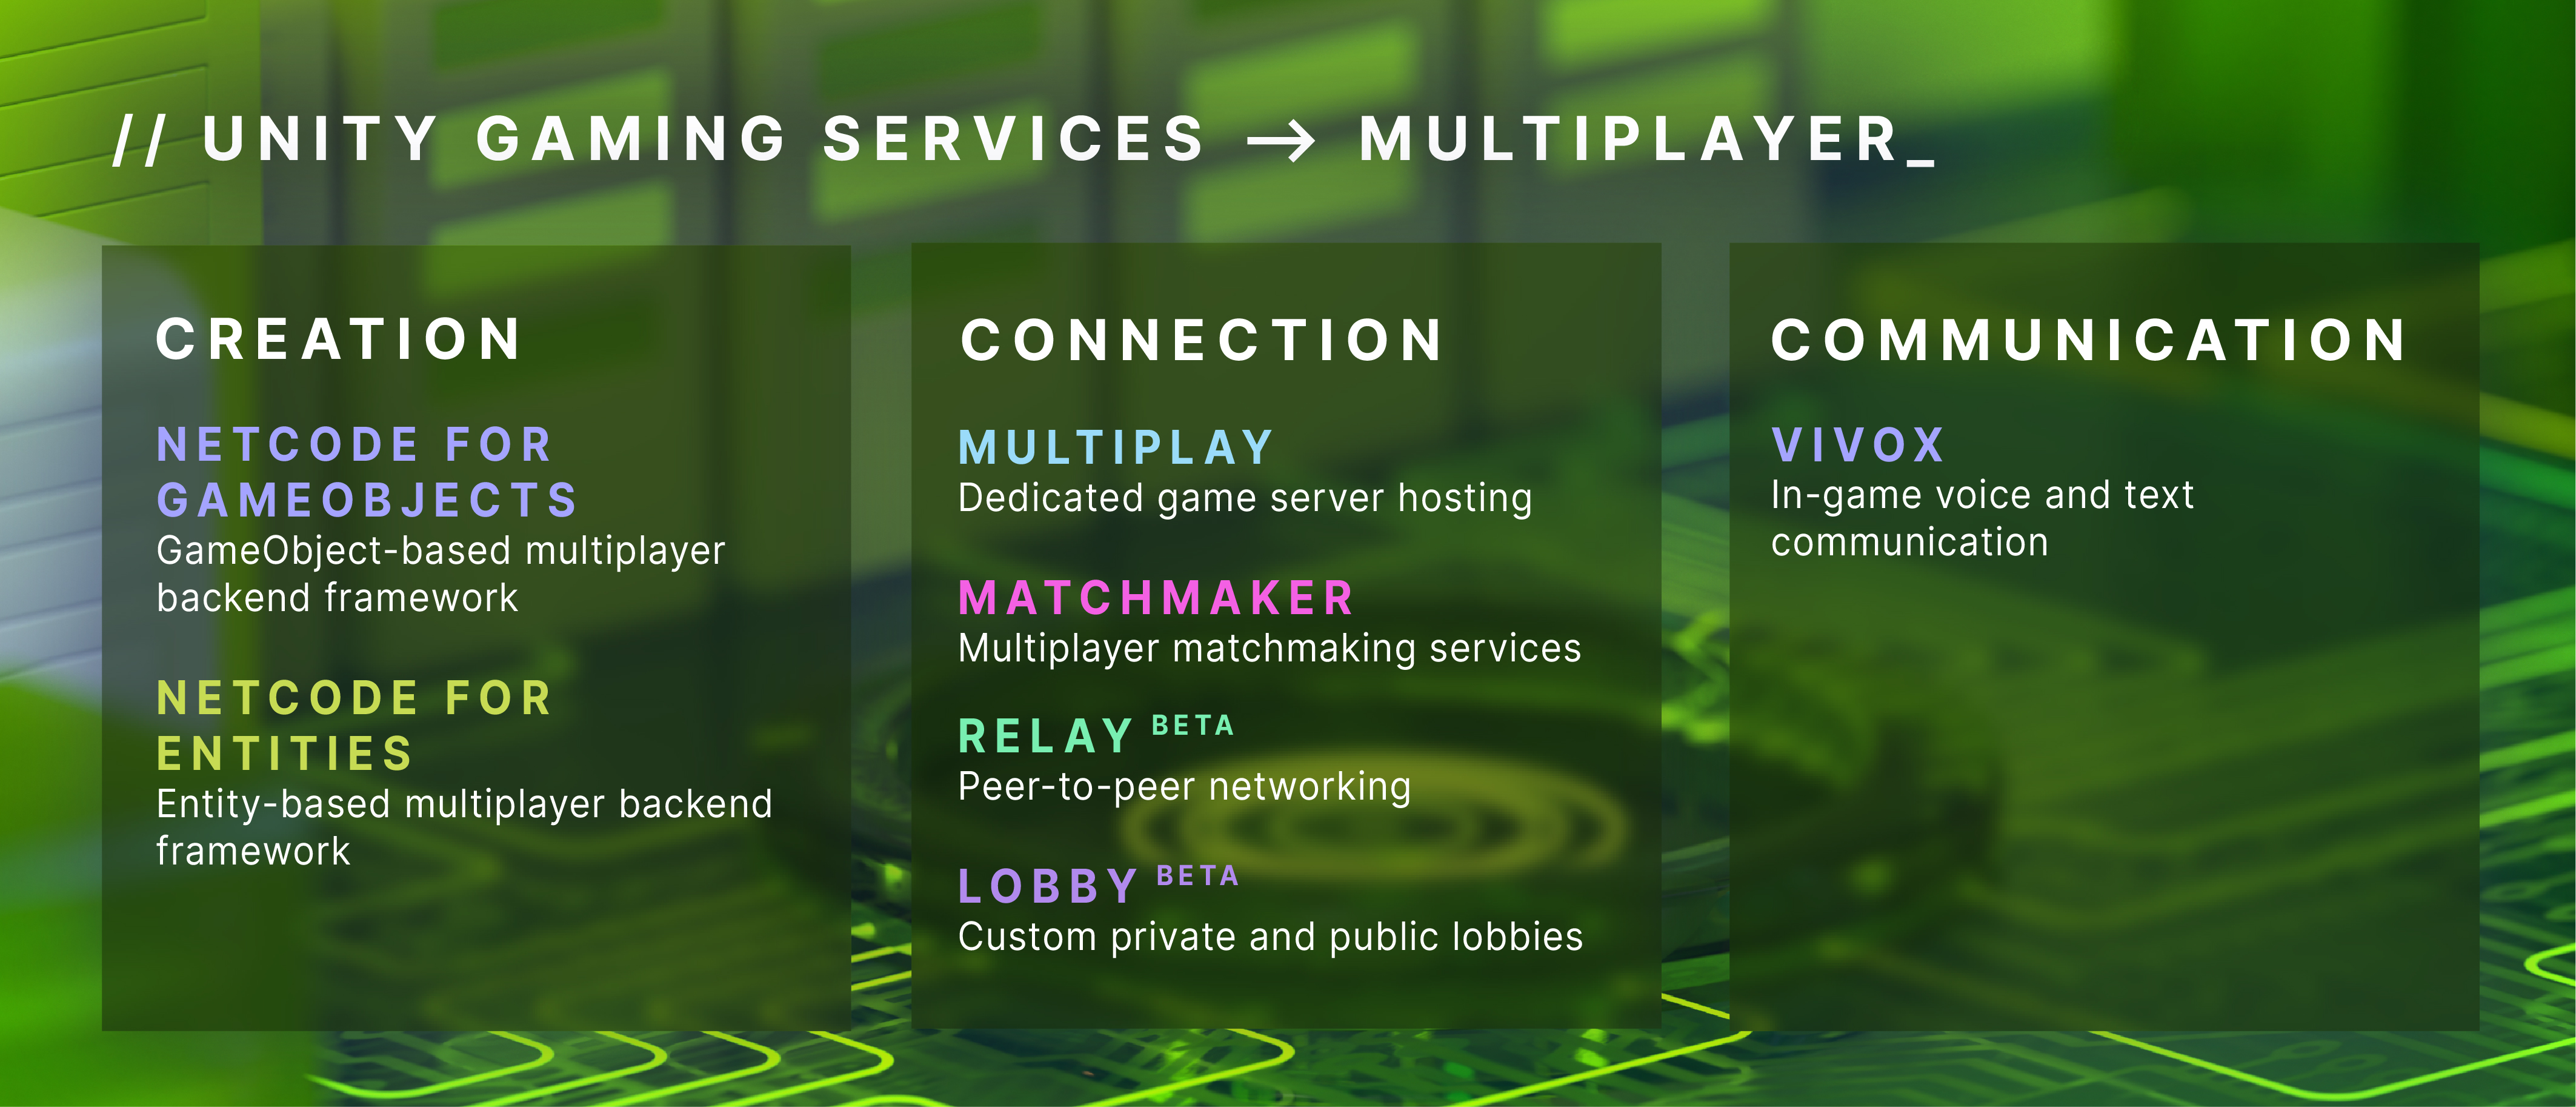 Multiplayer services breakdown between creation, connection, and communication